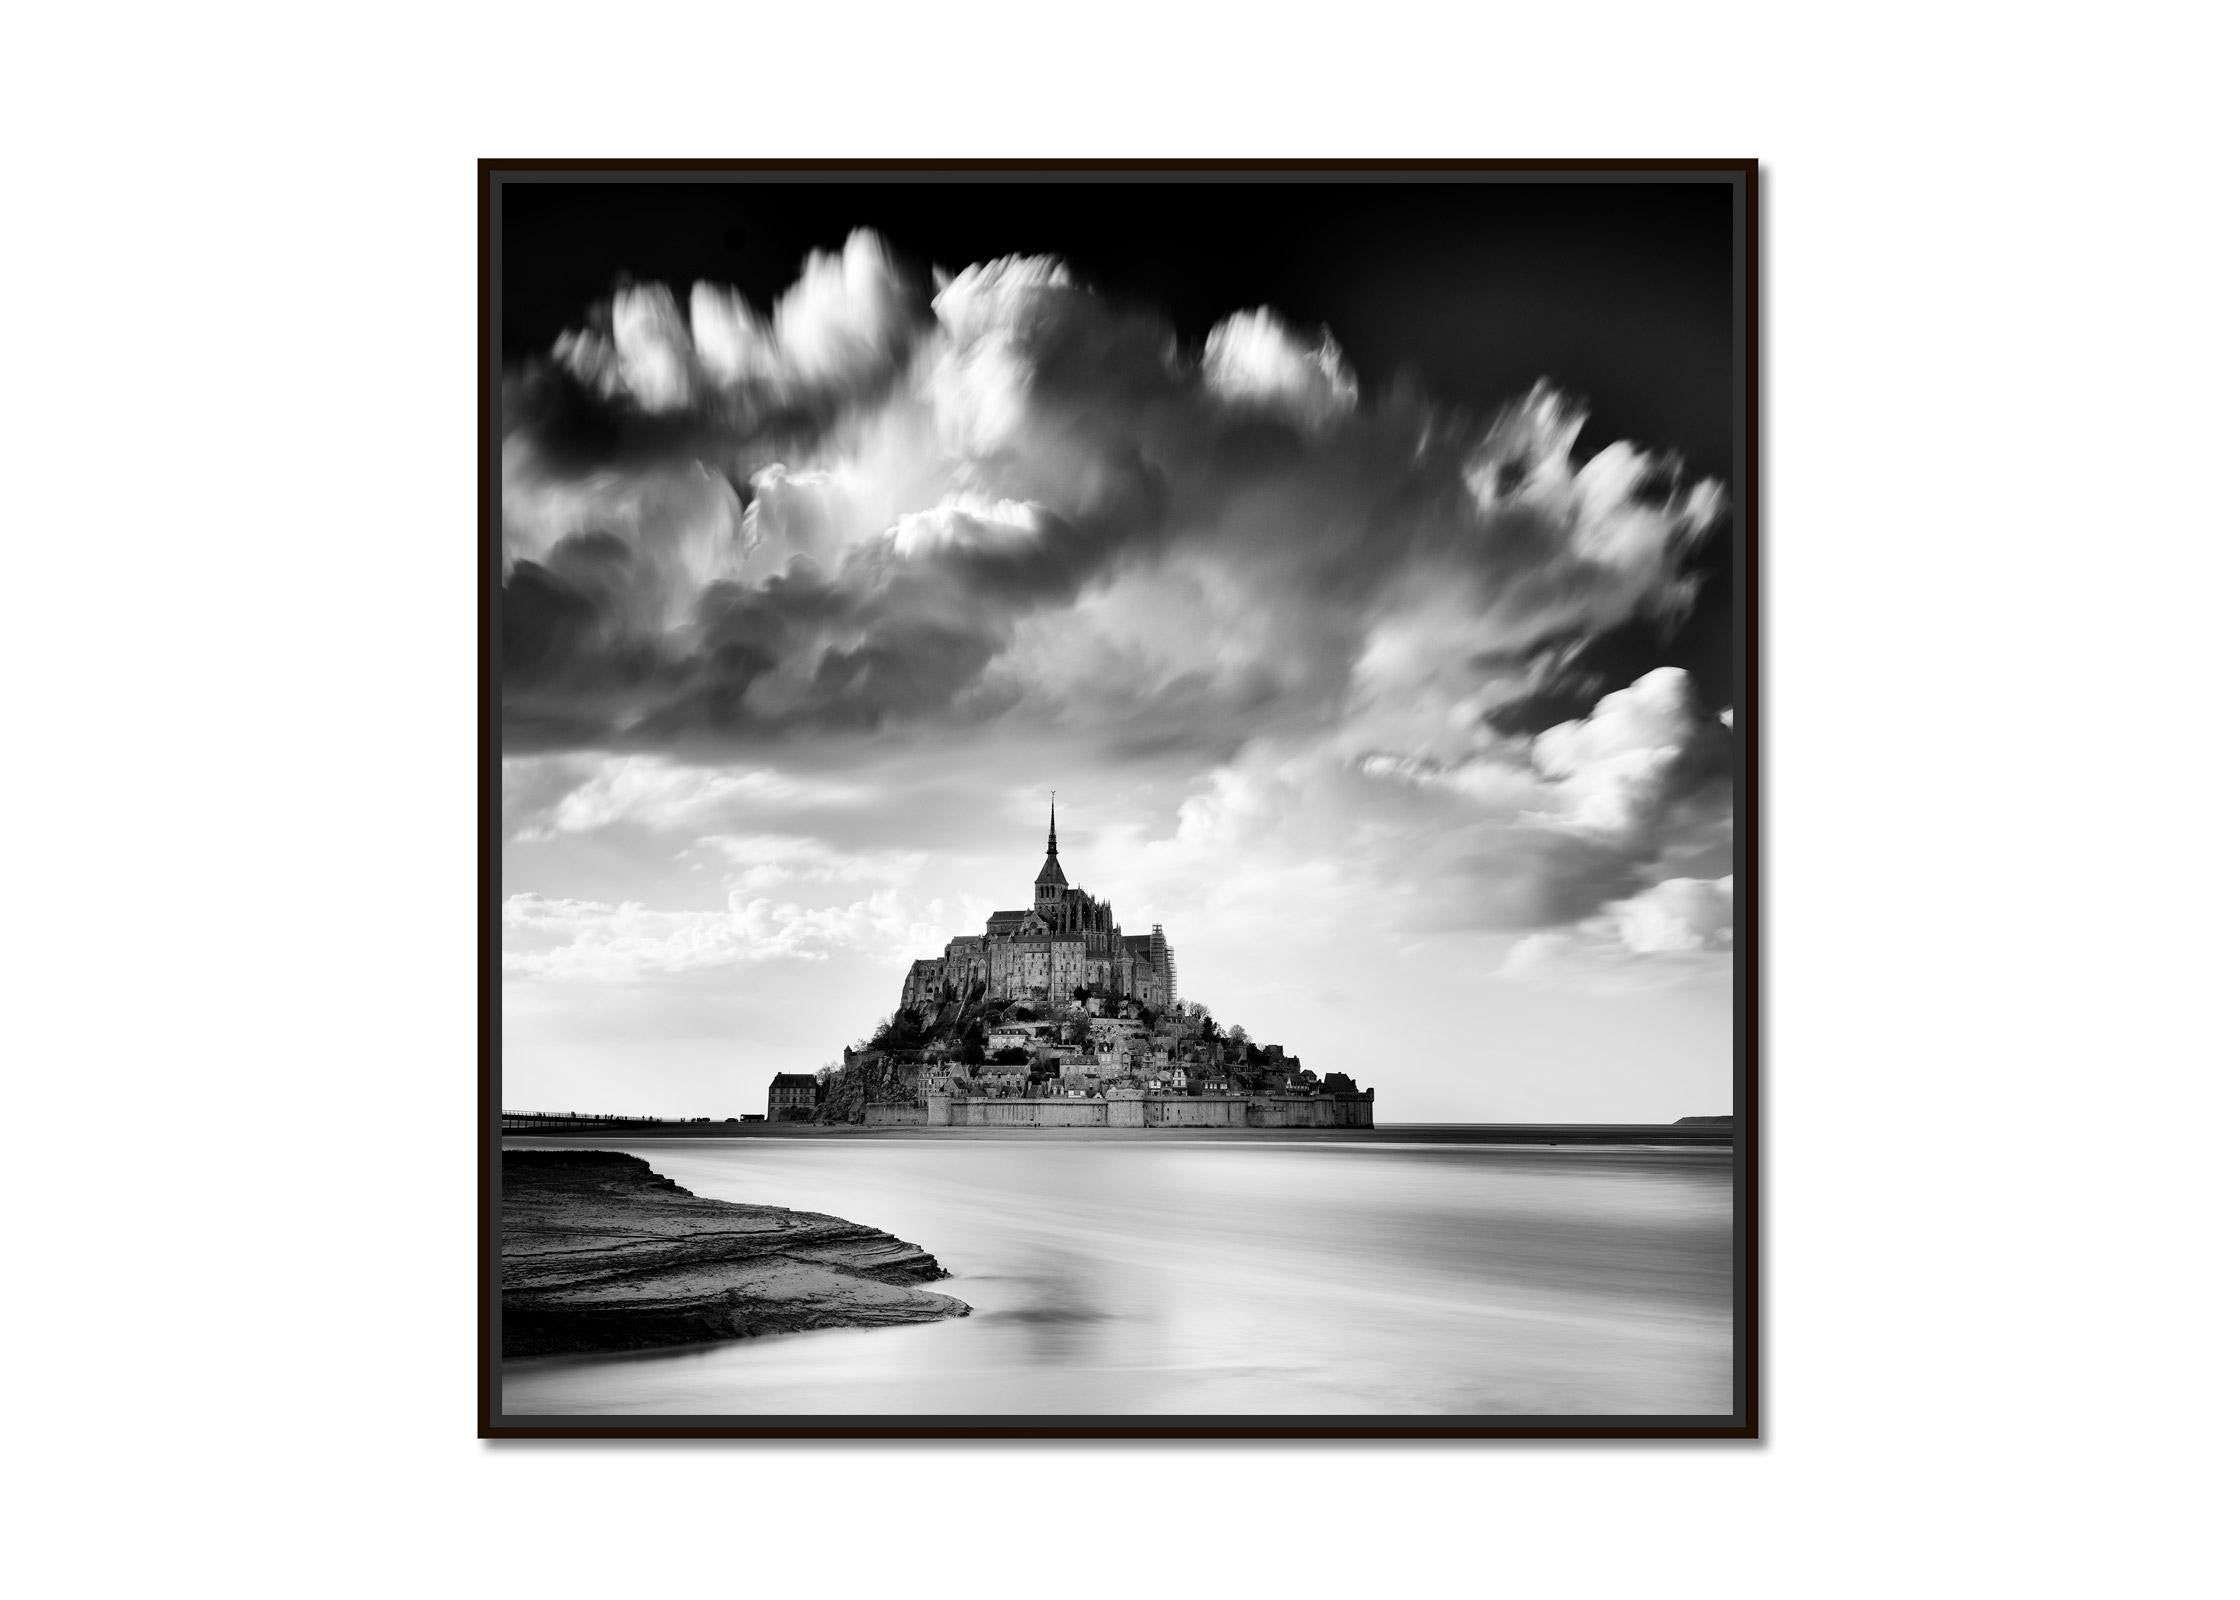 Mont Saint Michel, Impression Cloud, France, black and white art photography - Photograph by Gerald Berghammer